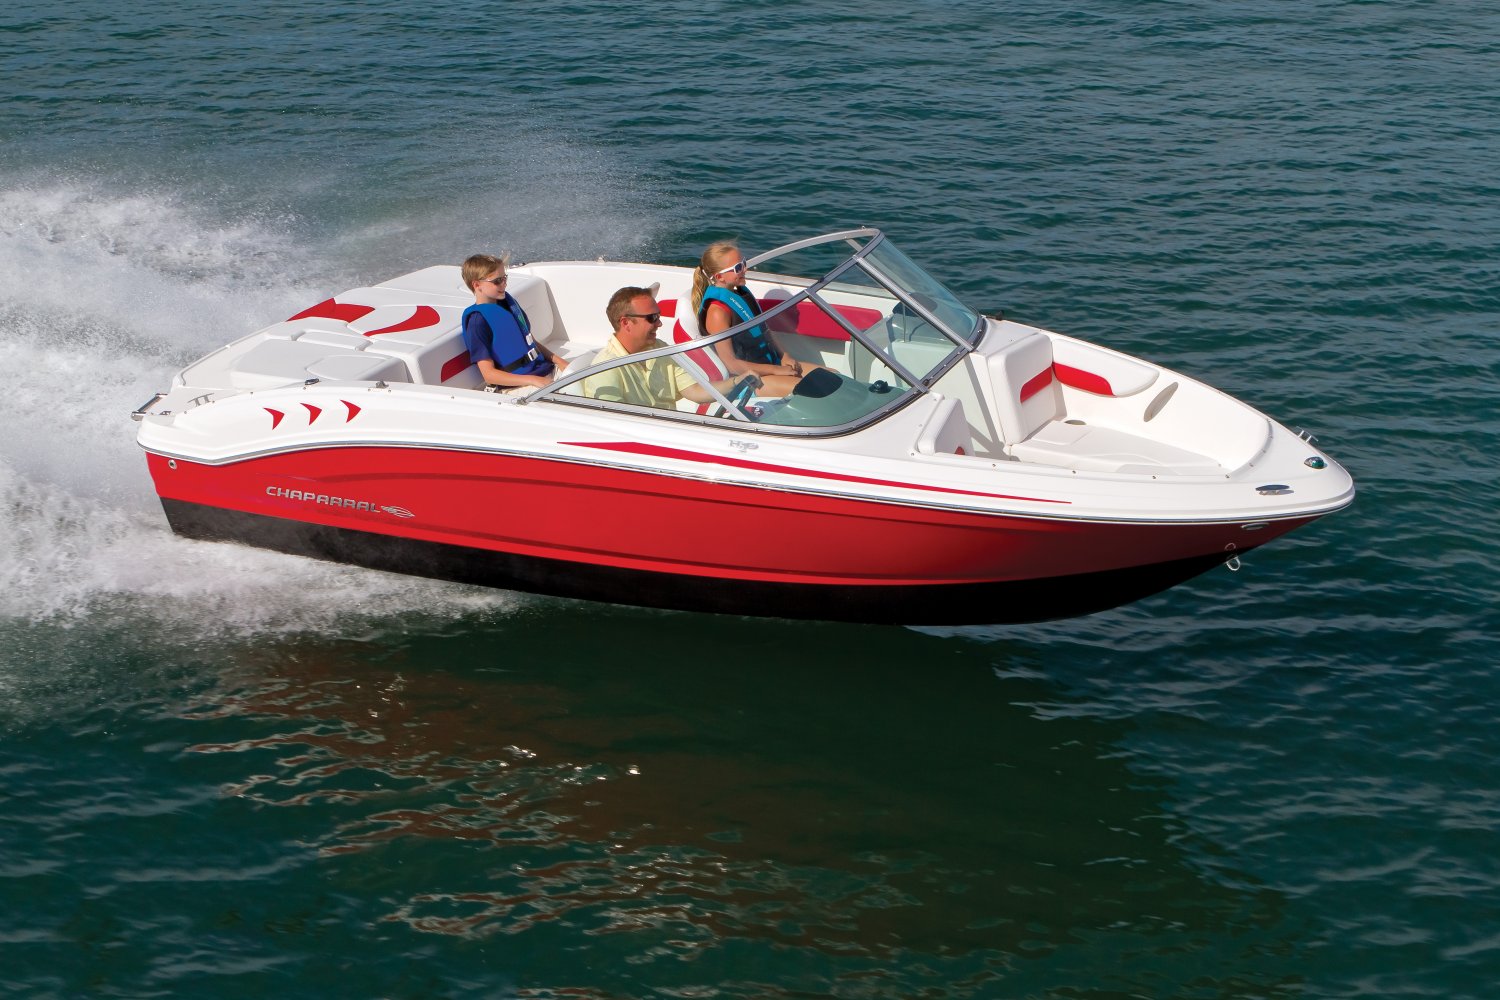 Eevelle V Hull Runabout Boat